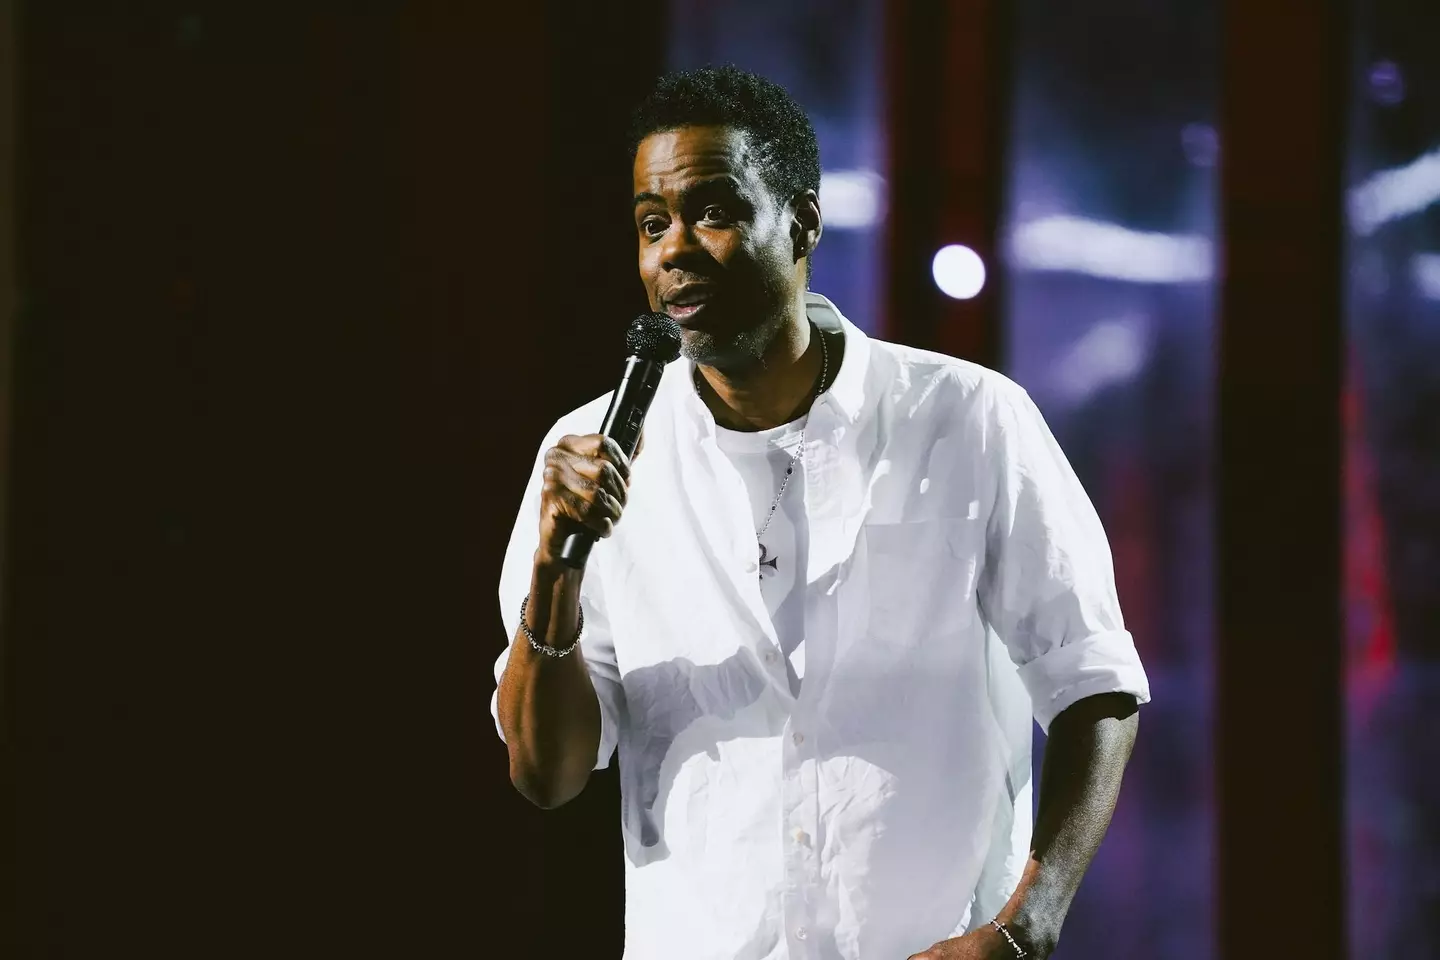 Chris Rock made a savage dig at Meghan Markle in his new special.